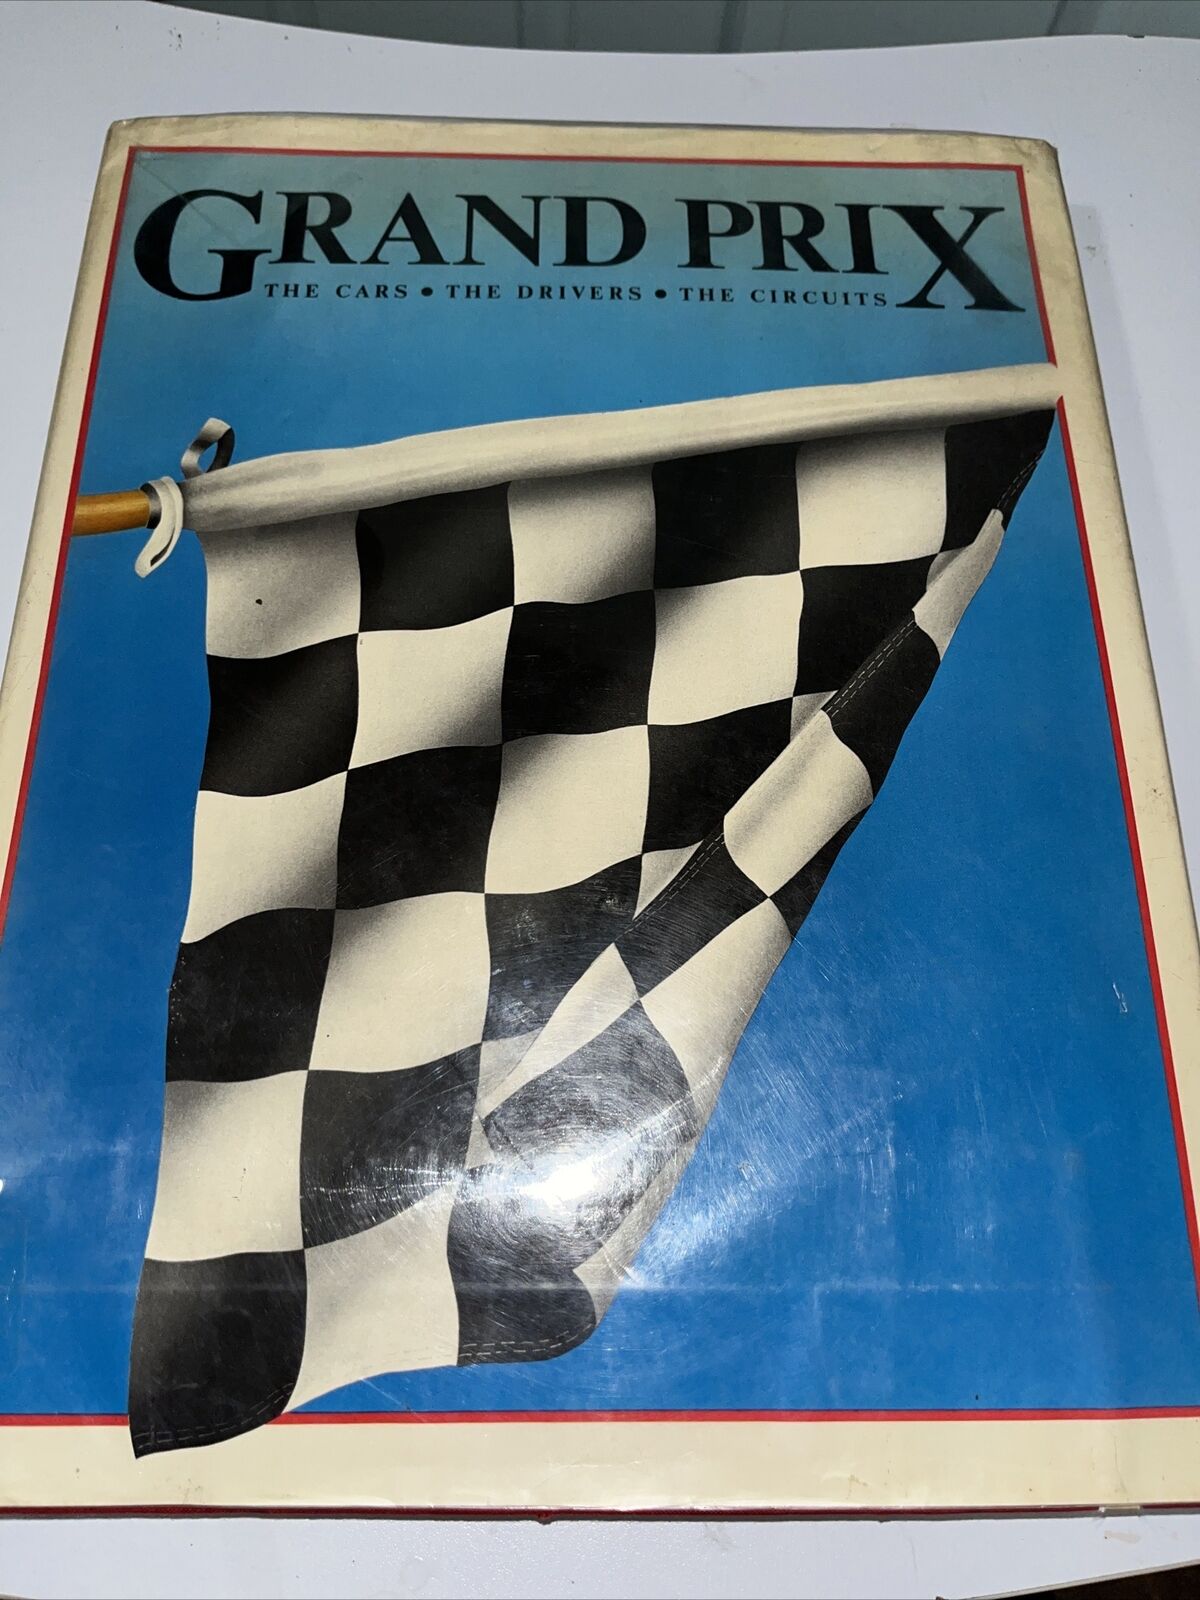 Vintage 1981 Grand Prix The Cars The Drivers The Circuits Hardcover Illustrated